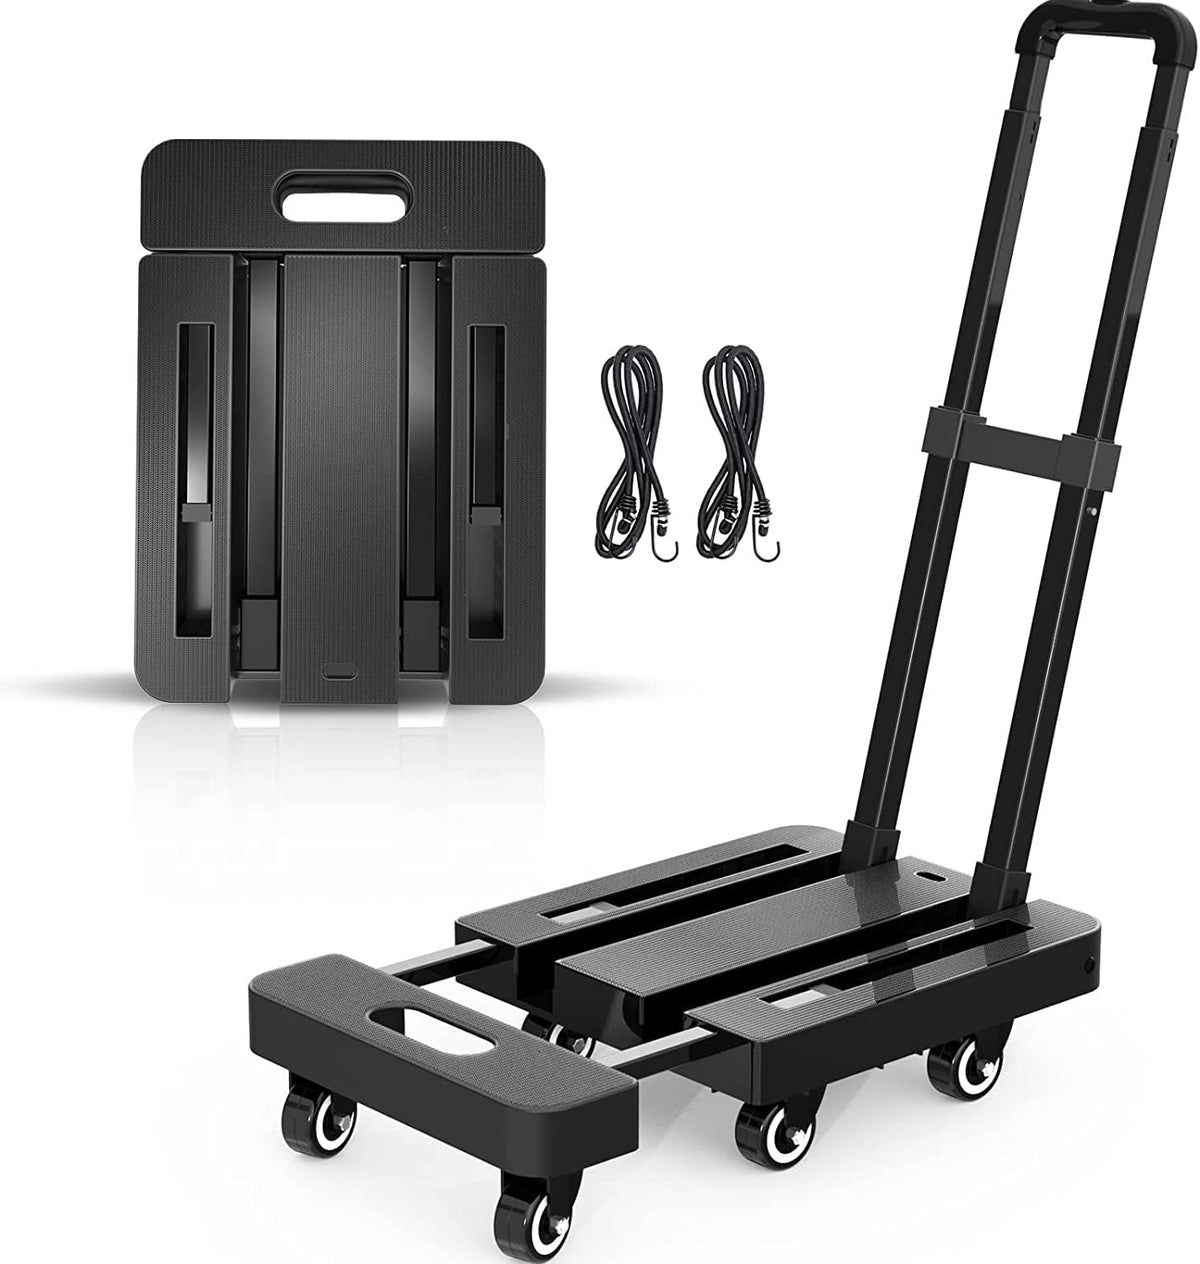 Cheston Portable Folding Platform Trolley for Material Handling I 6 Wheels & 2 Elastic Ropes I Utility Luggage Cart I Telescopic Handle I Heavy Duty Hand Truck for Groceries, Luggage I 150kg Capacity